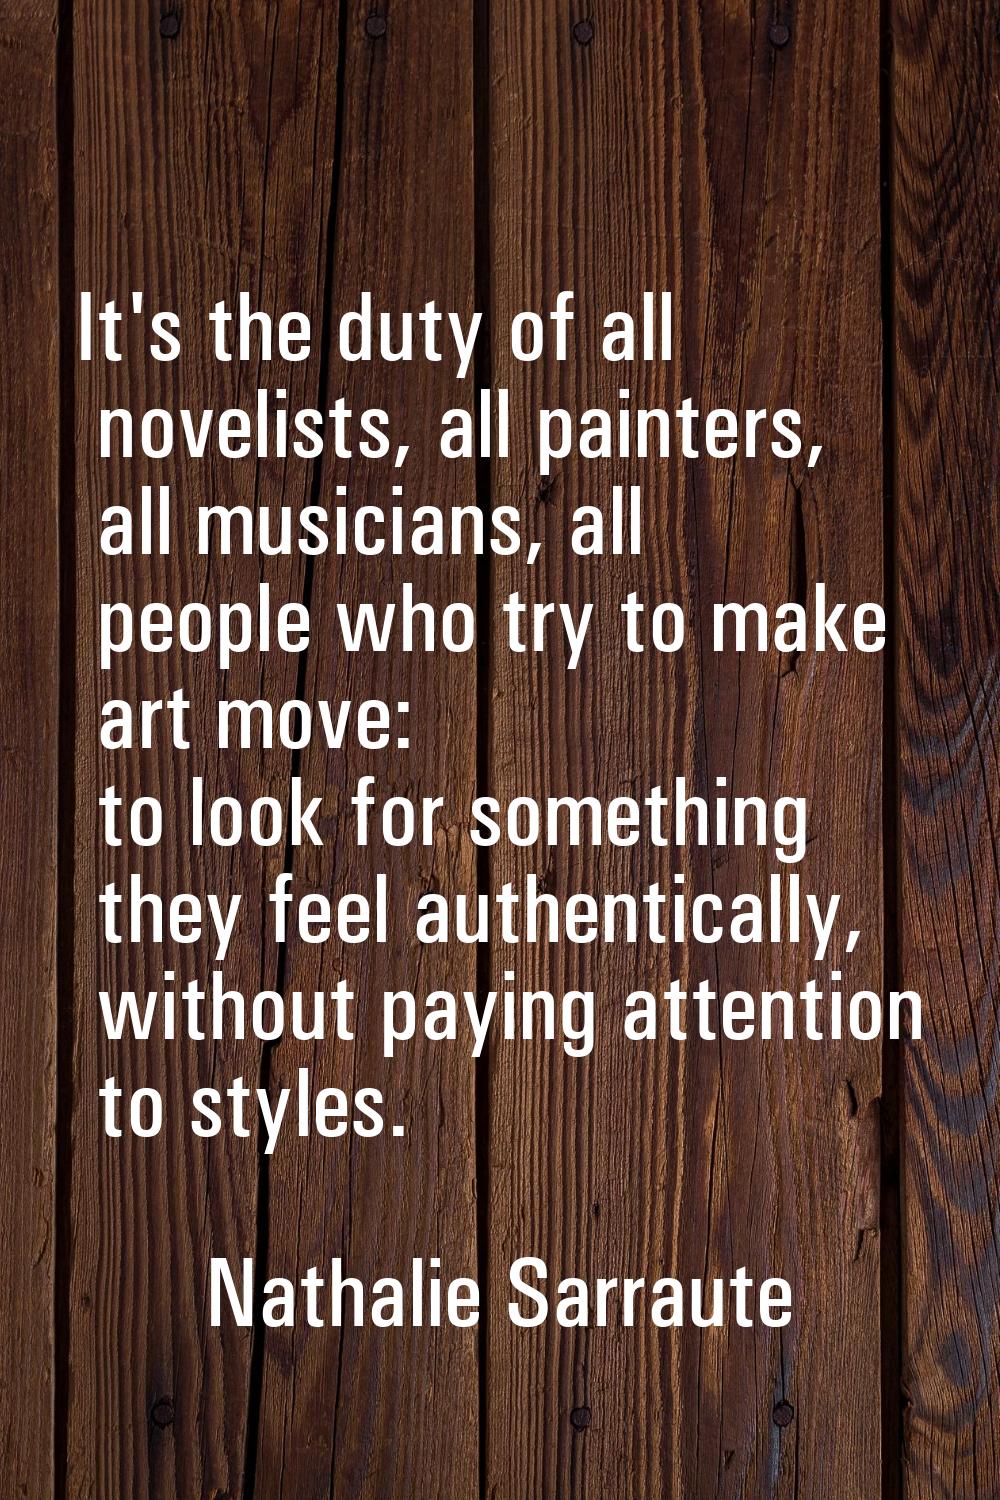 It's the duty of all novelists, all painters, all musicians, all people who try to make art move: t